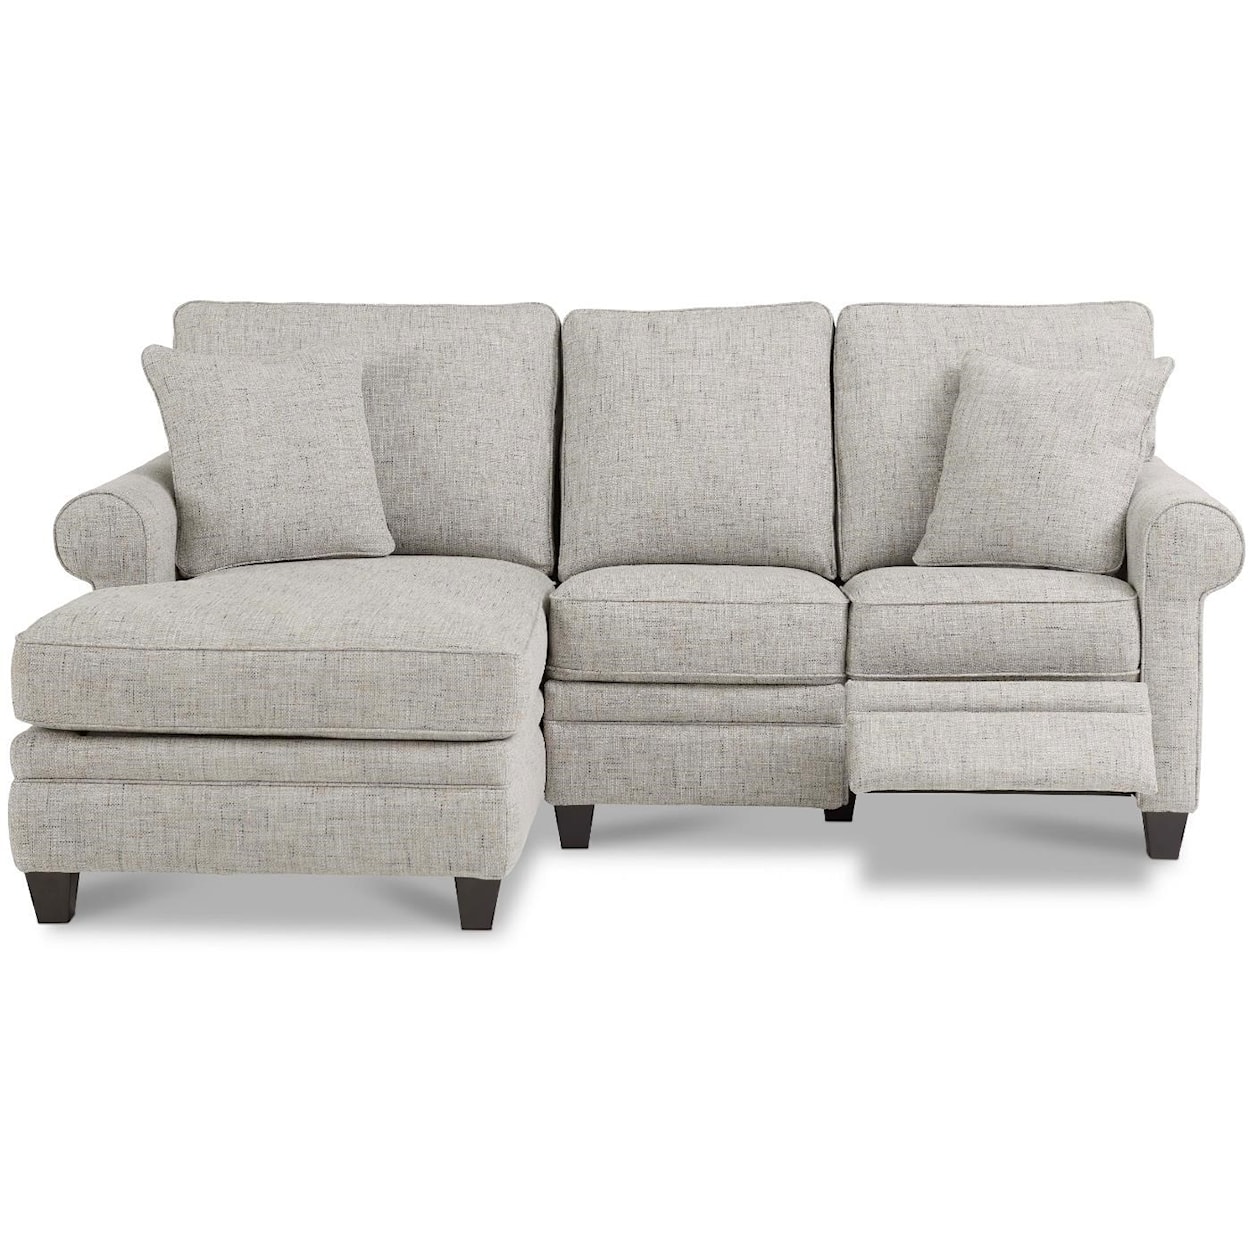 La-Z-Boy Colby Colby Loveseat and Chaise